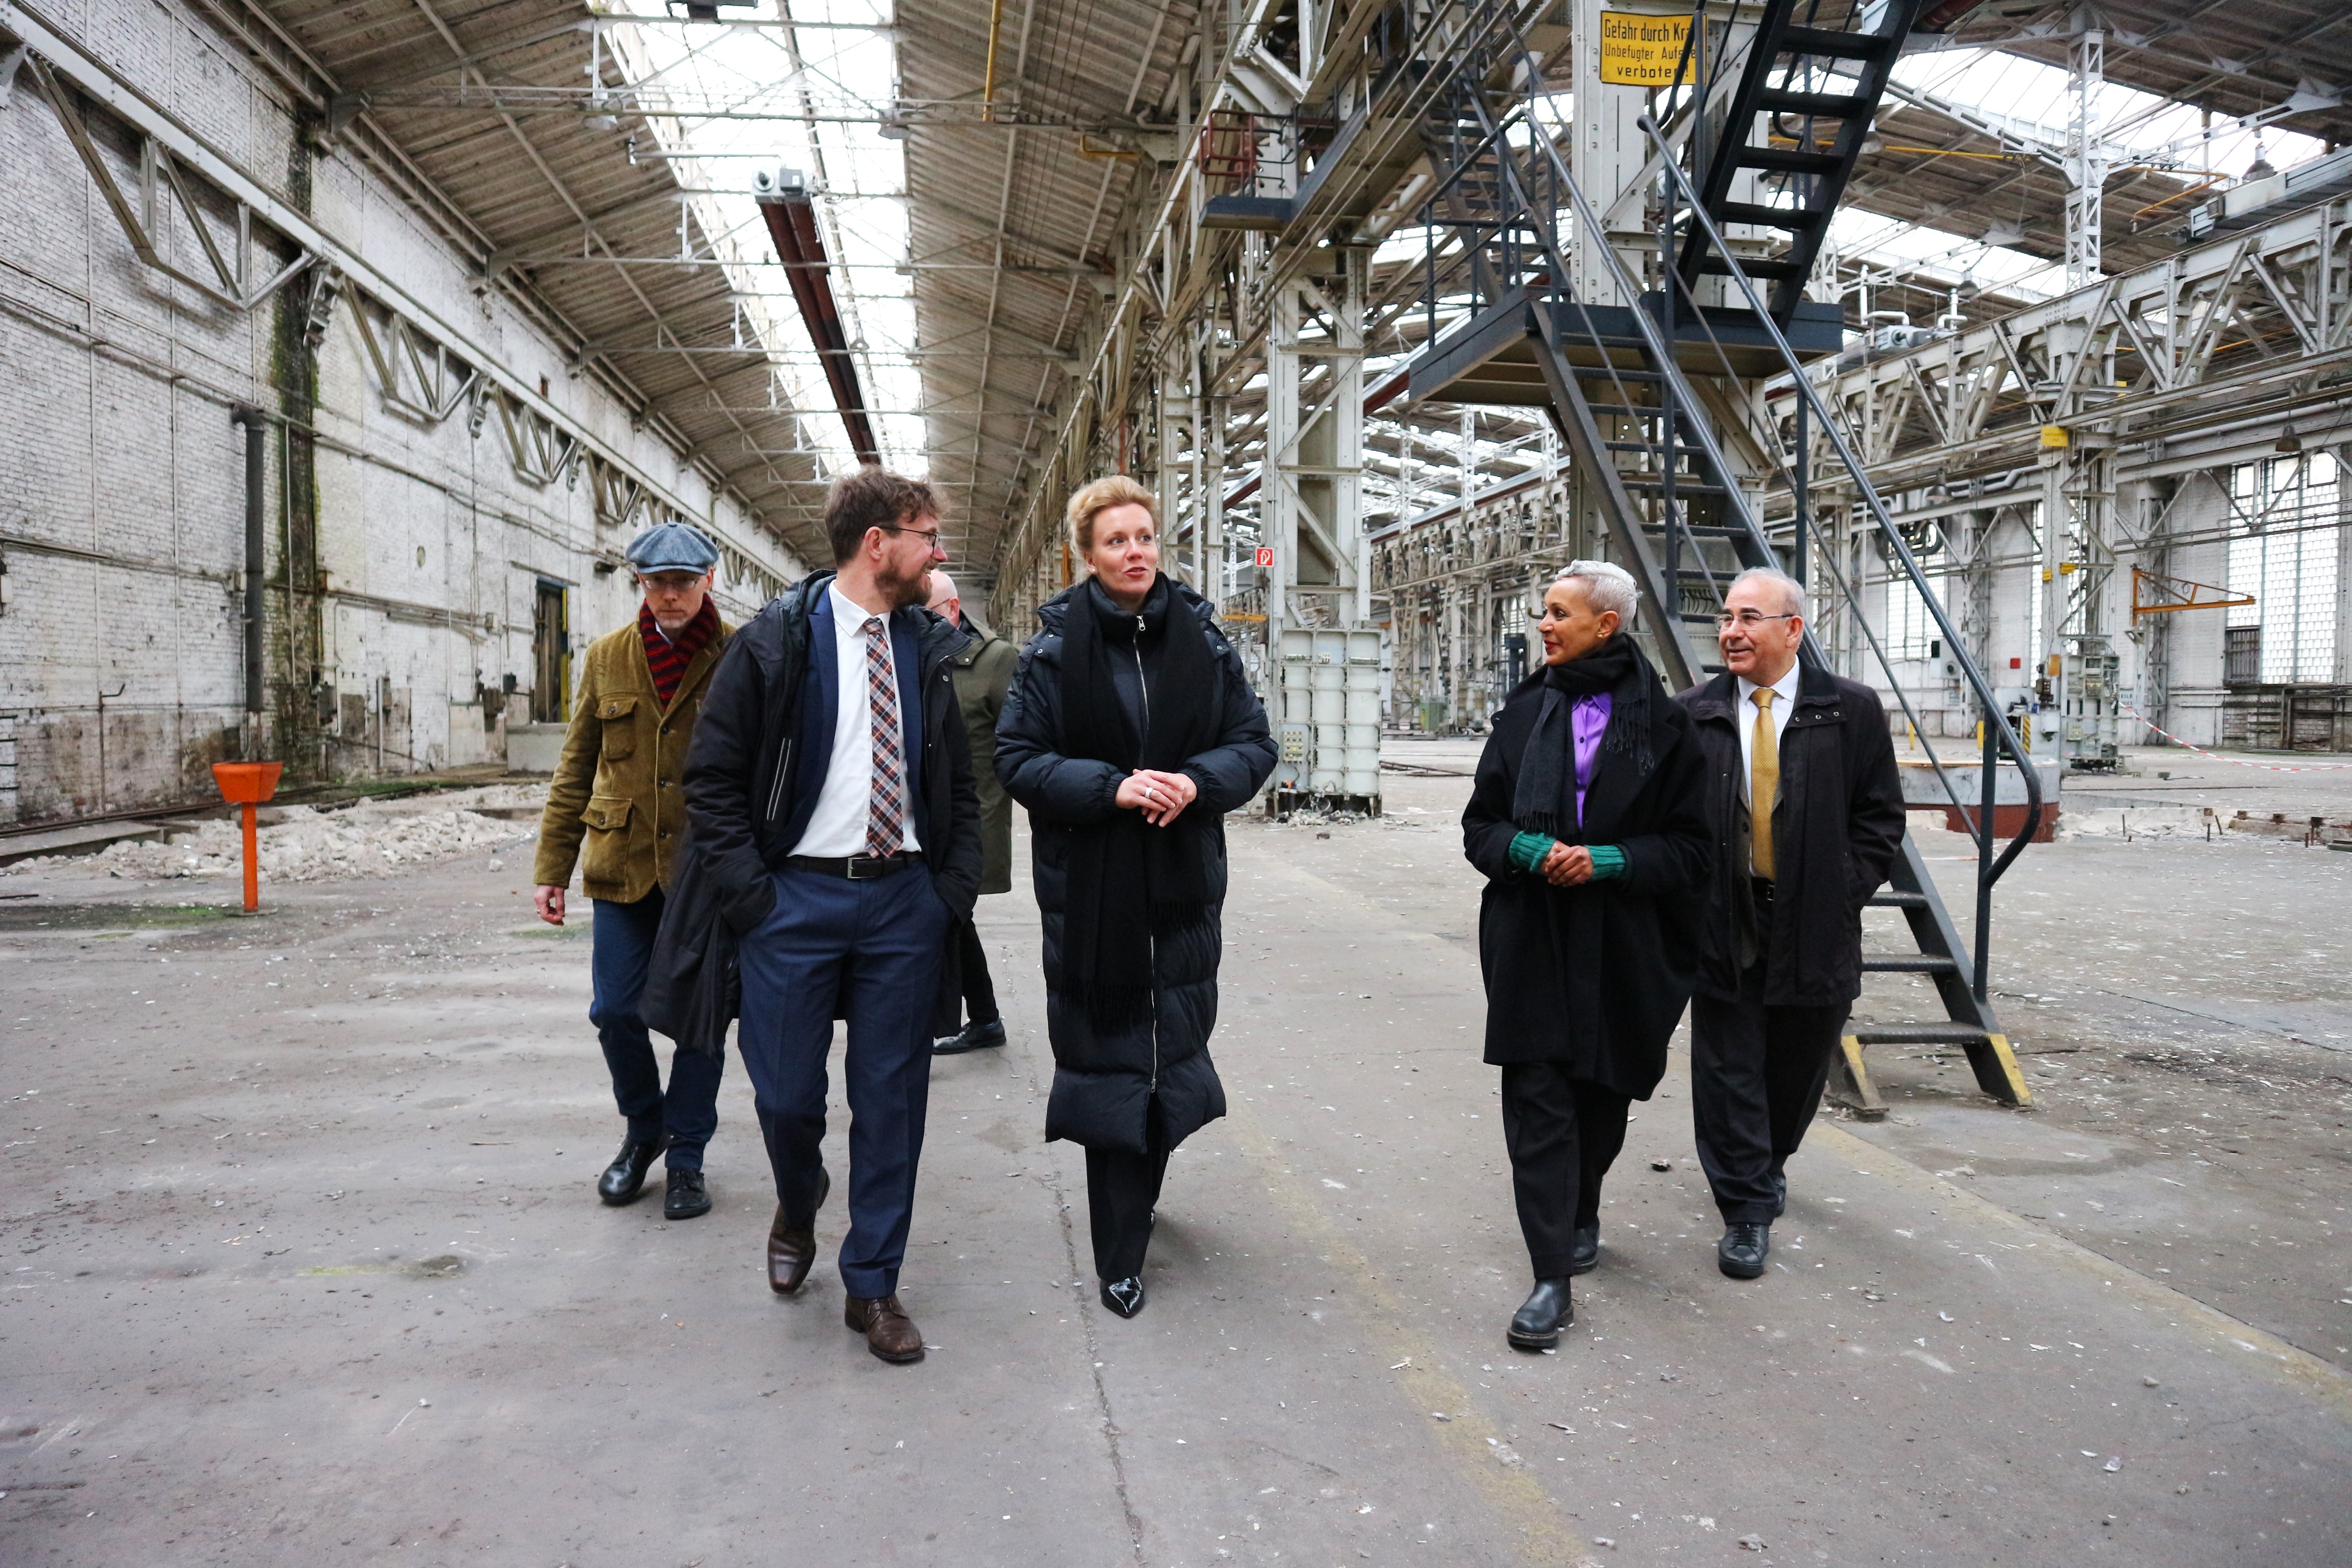 Dr. Robert Fuchs, the Managing Director of DOMiD (front left), and the DOMiD project manager for the museum building ,Yordanos Asghedom (front right), guide the Minister through "Hall 70", where the museum is to be built. Photo: DOMiD archive, Cologne